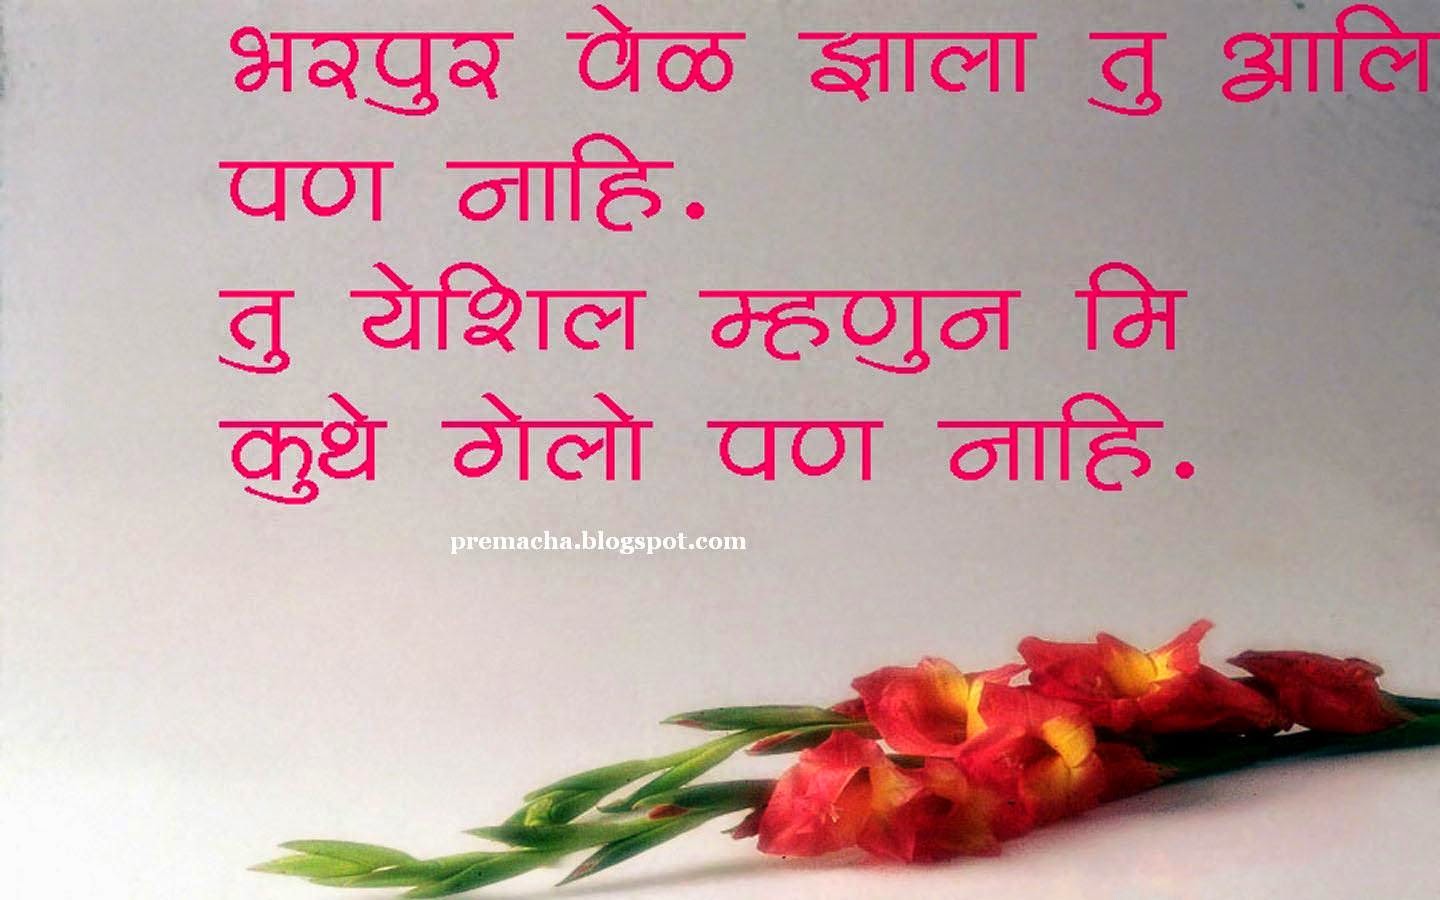 Love Images Hd With Marathi Quotes - Fachurodji